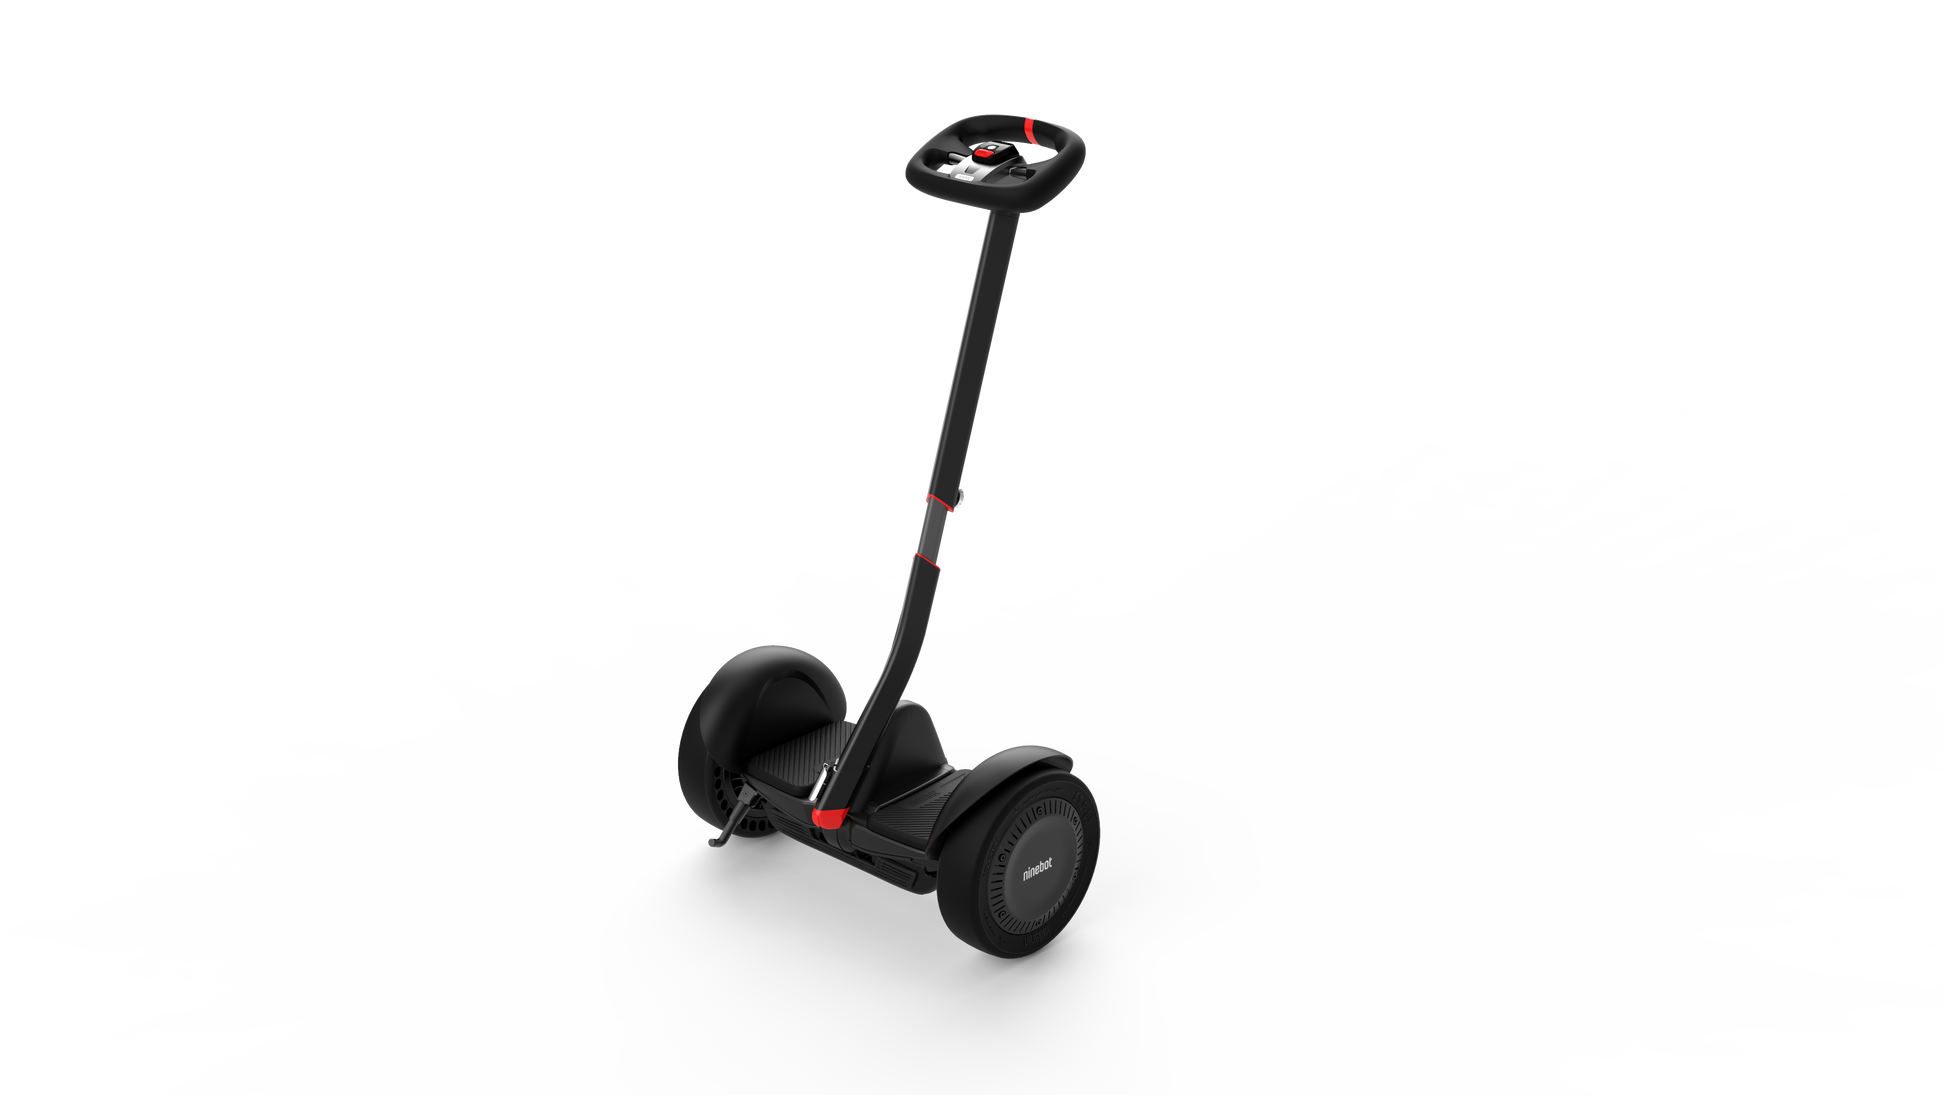 Segway Ninebot S Max self-balancing electric hoverboard scooter with adjustable steering column and steering wheel. Top speed of 20km/h with solid rubber tires. Similar to the Ninebot S and S plus. Back view with kickstand.